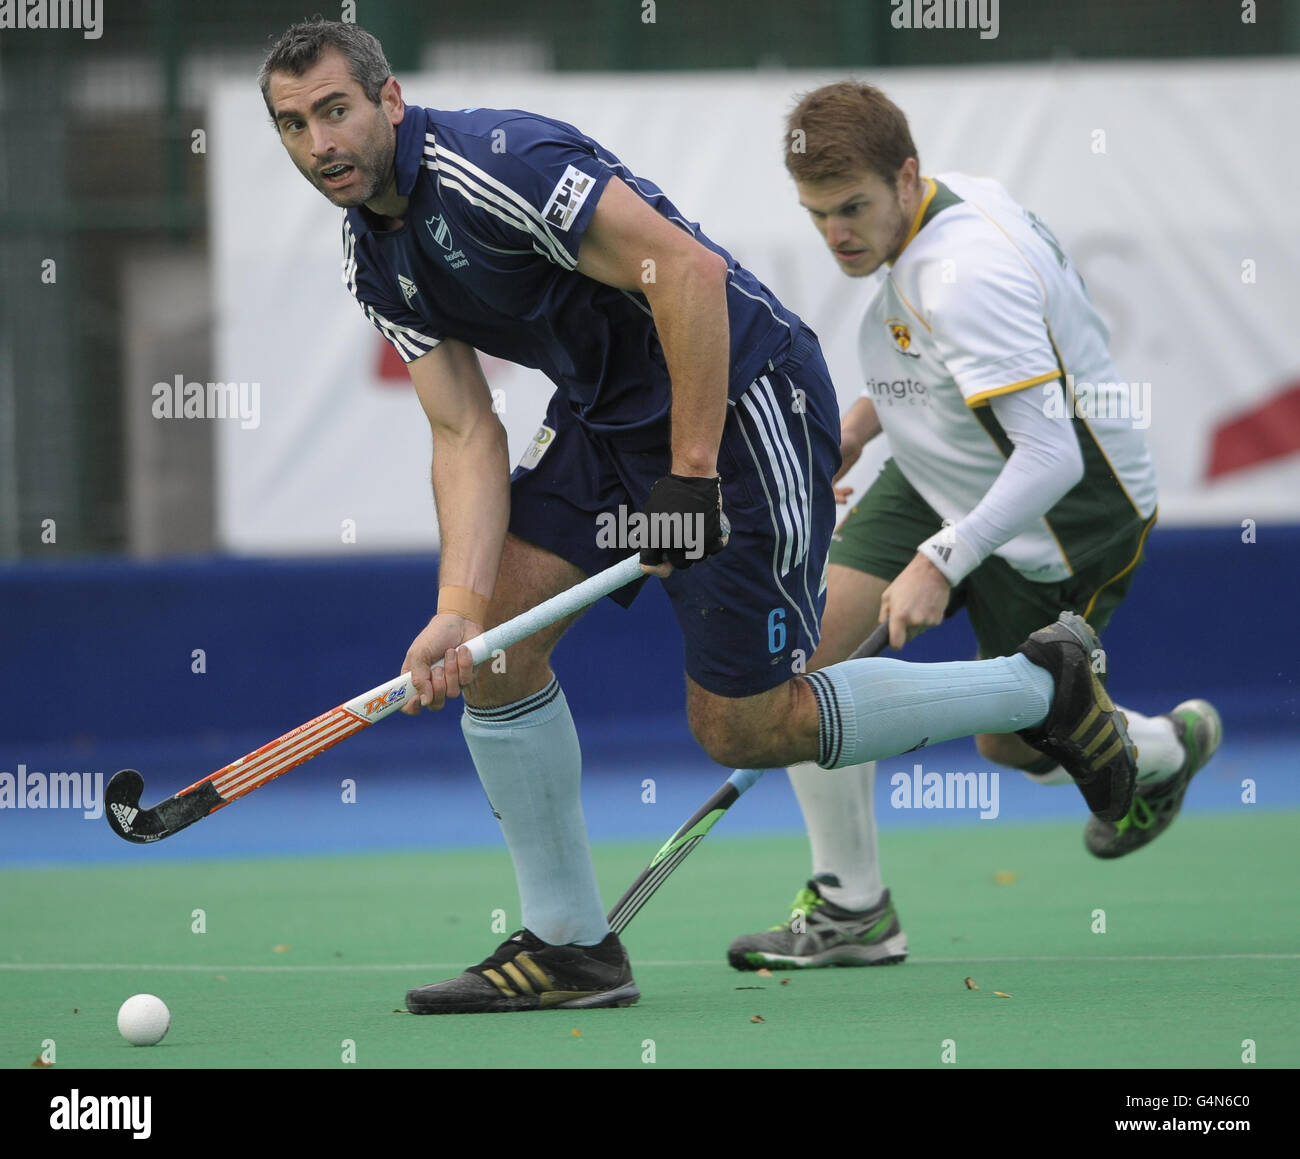 Reading's Richard Mantell looks to clear the defence during their Investec Men's Premier Division match at Sonning Lane, Reading. Stock Photo